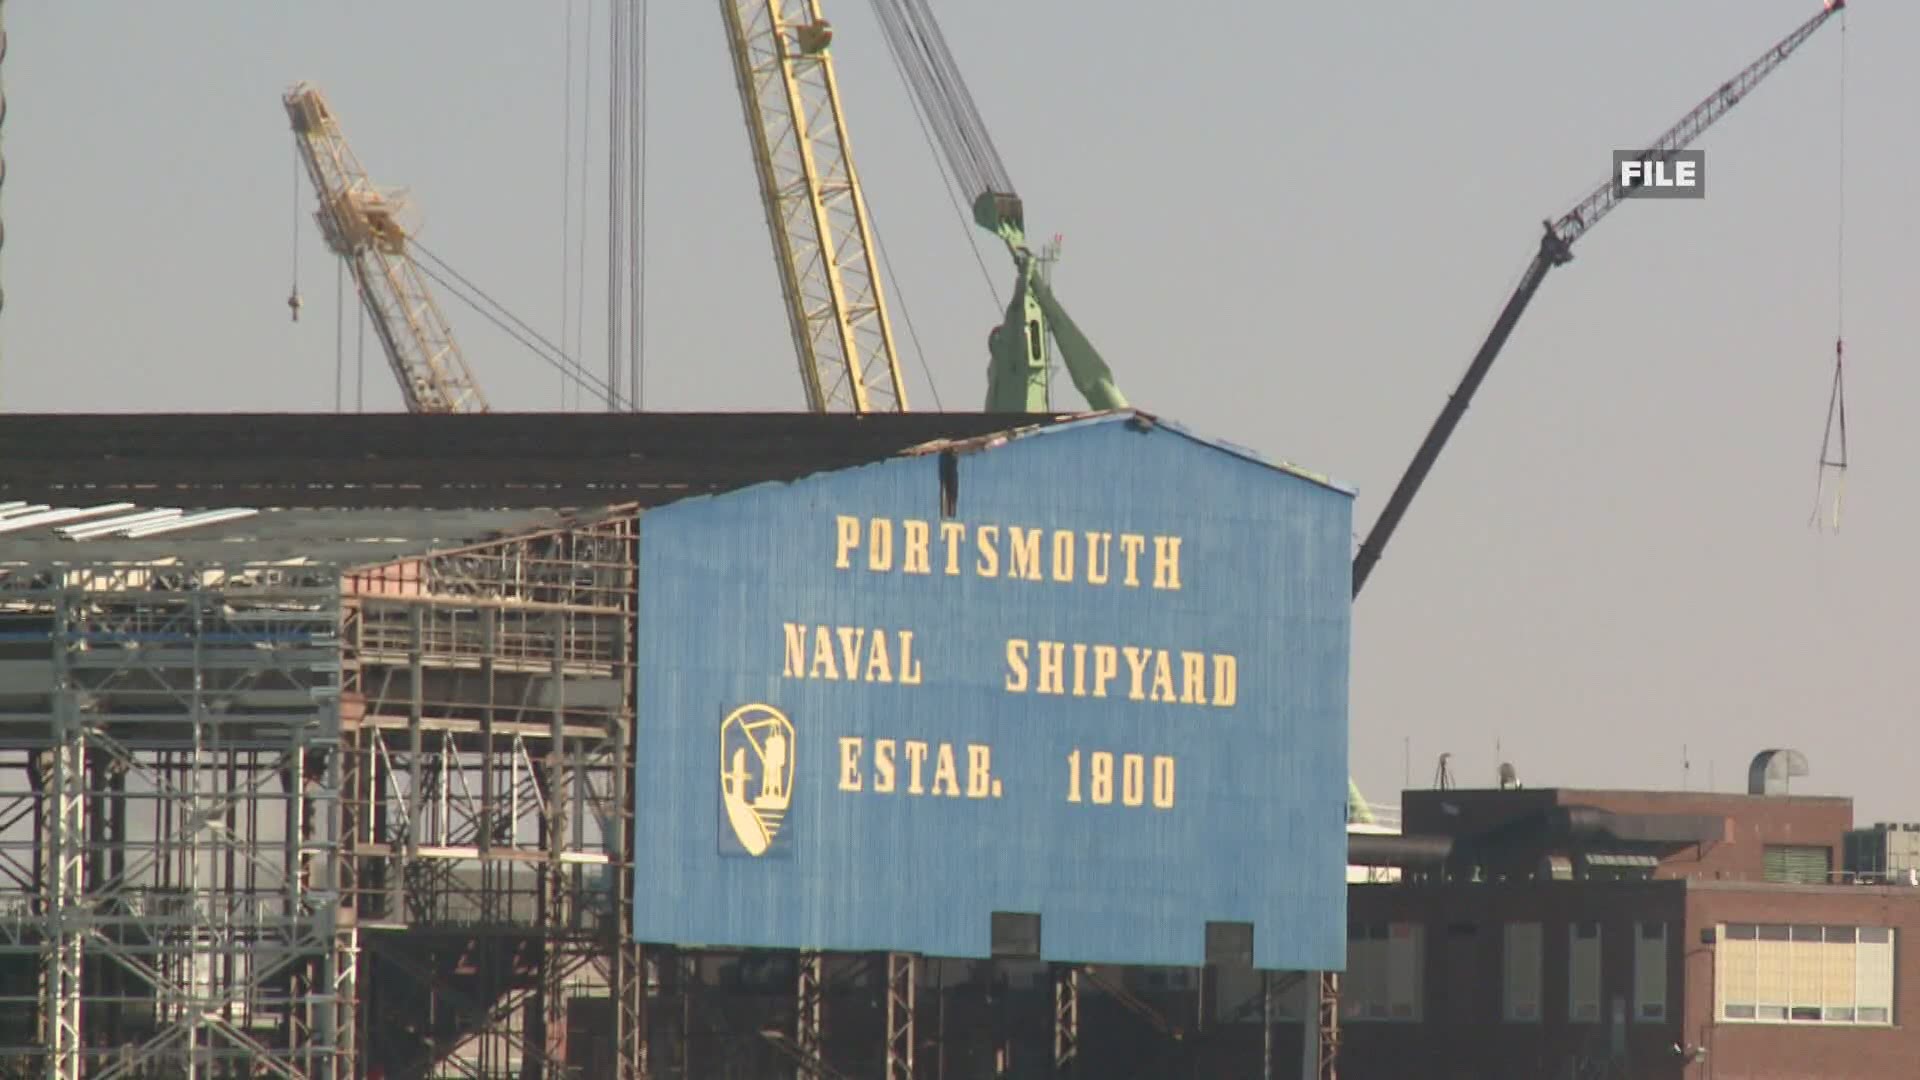 A worker at the Portsmouth Naval Shipyard in Kittery has died from complications from COVID-19.